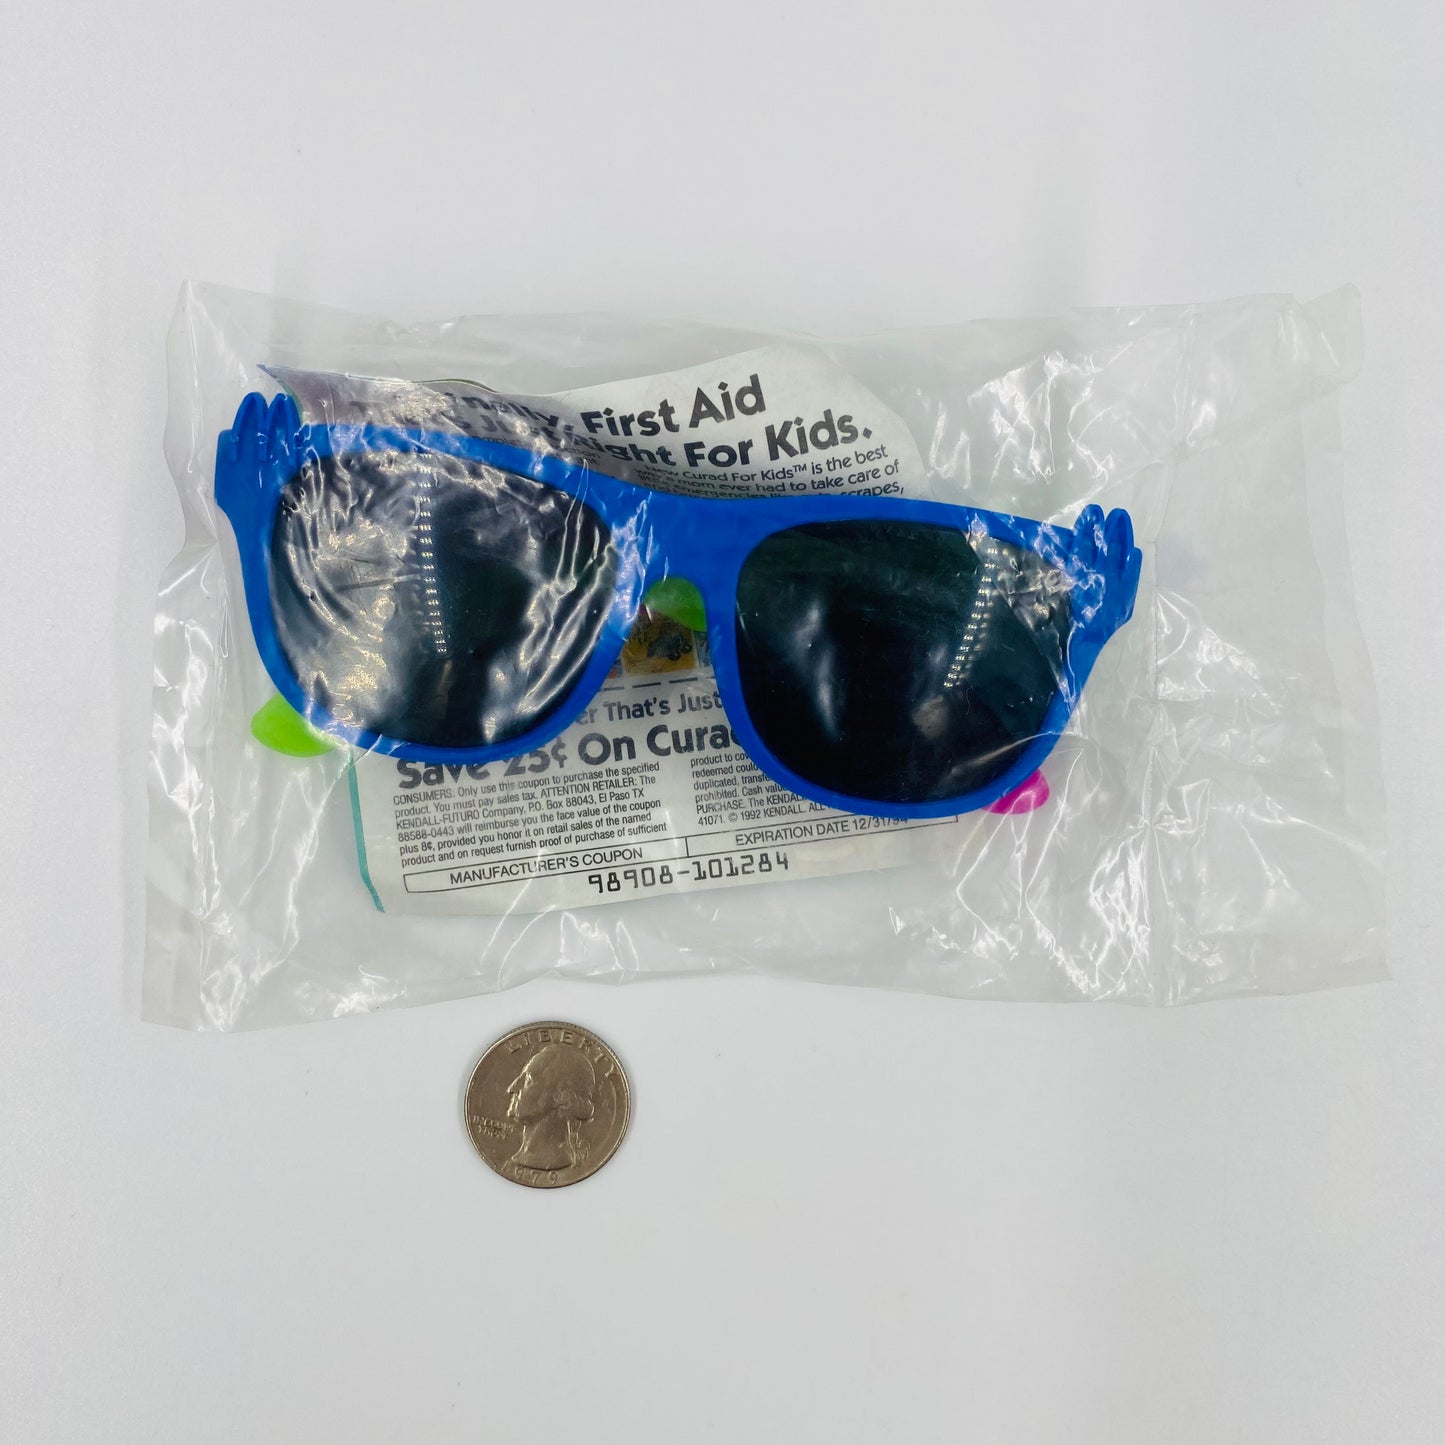 McDonald's Presents Out For Fun! McDonaldland Sunglasses McDonald's Happy Meal toy (1992) bagged